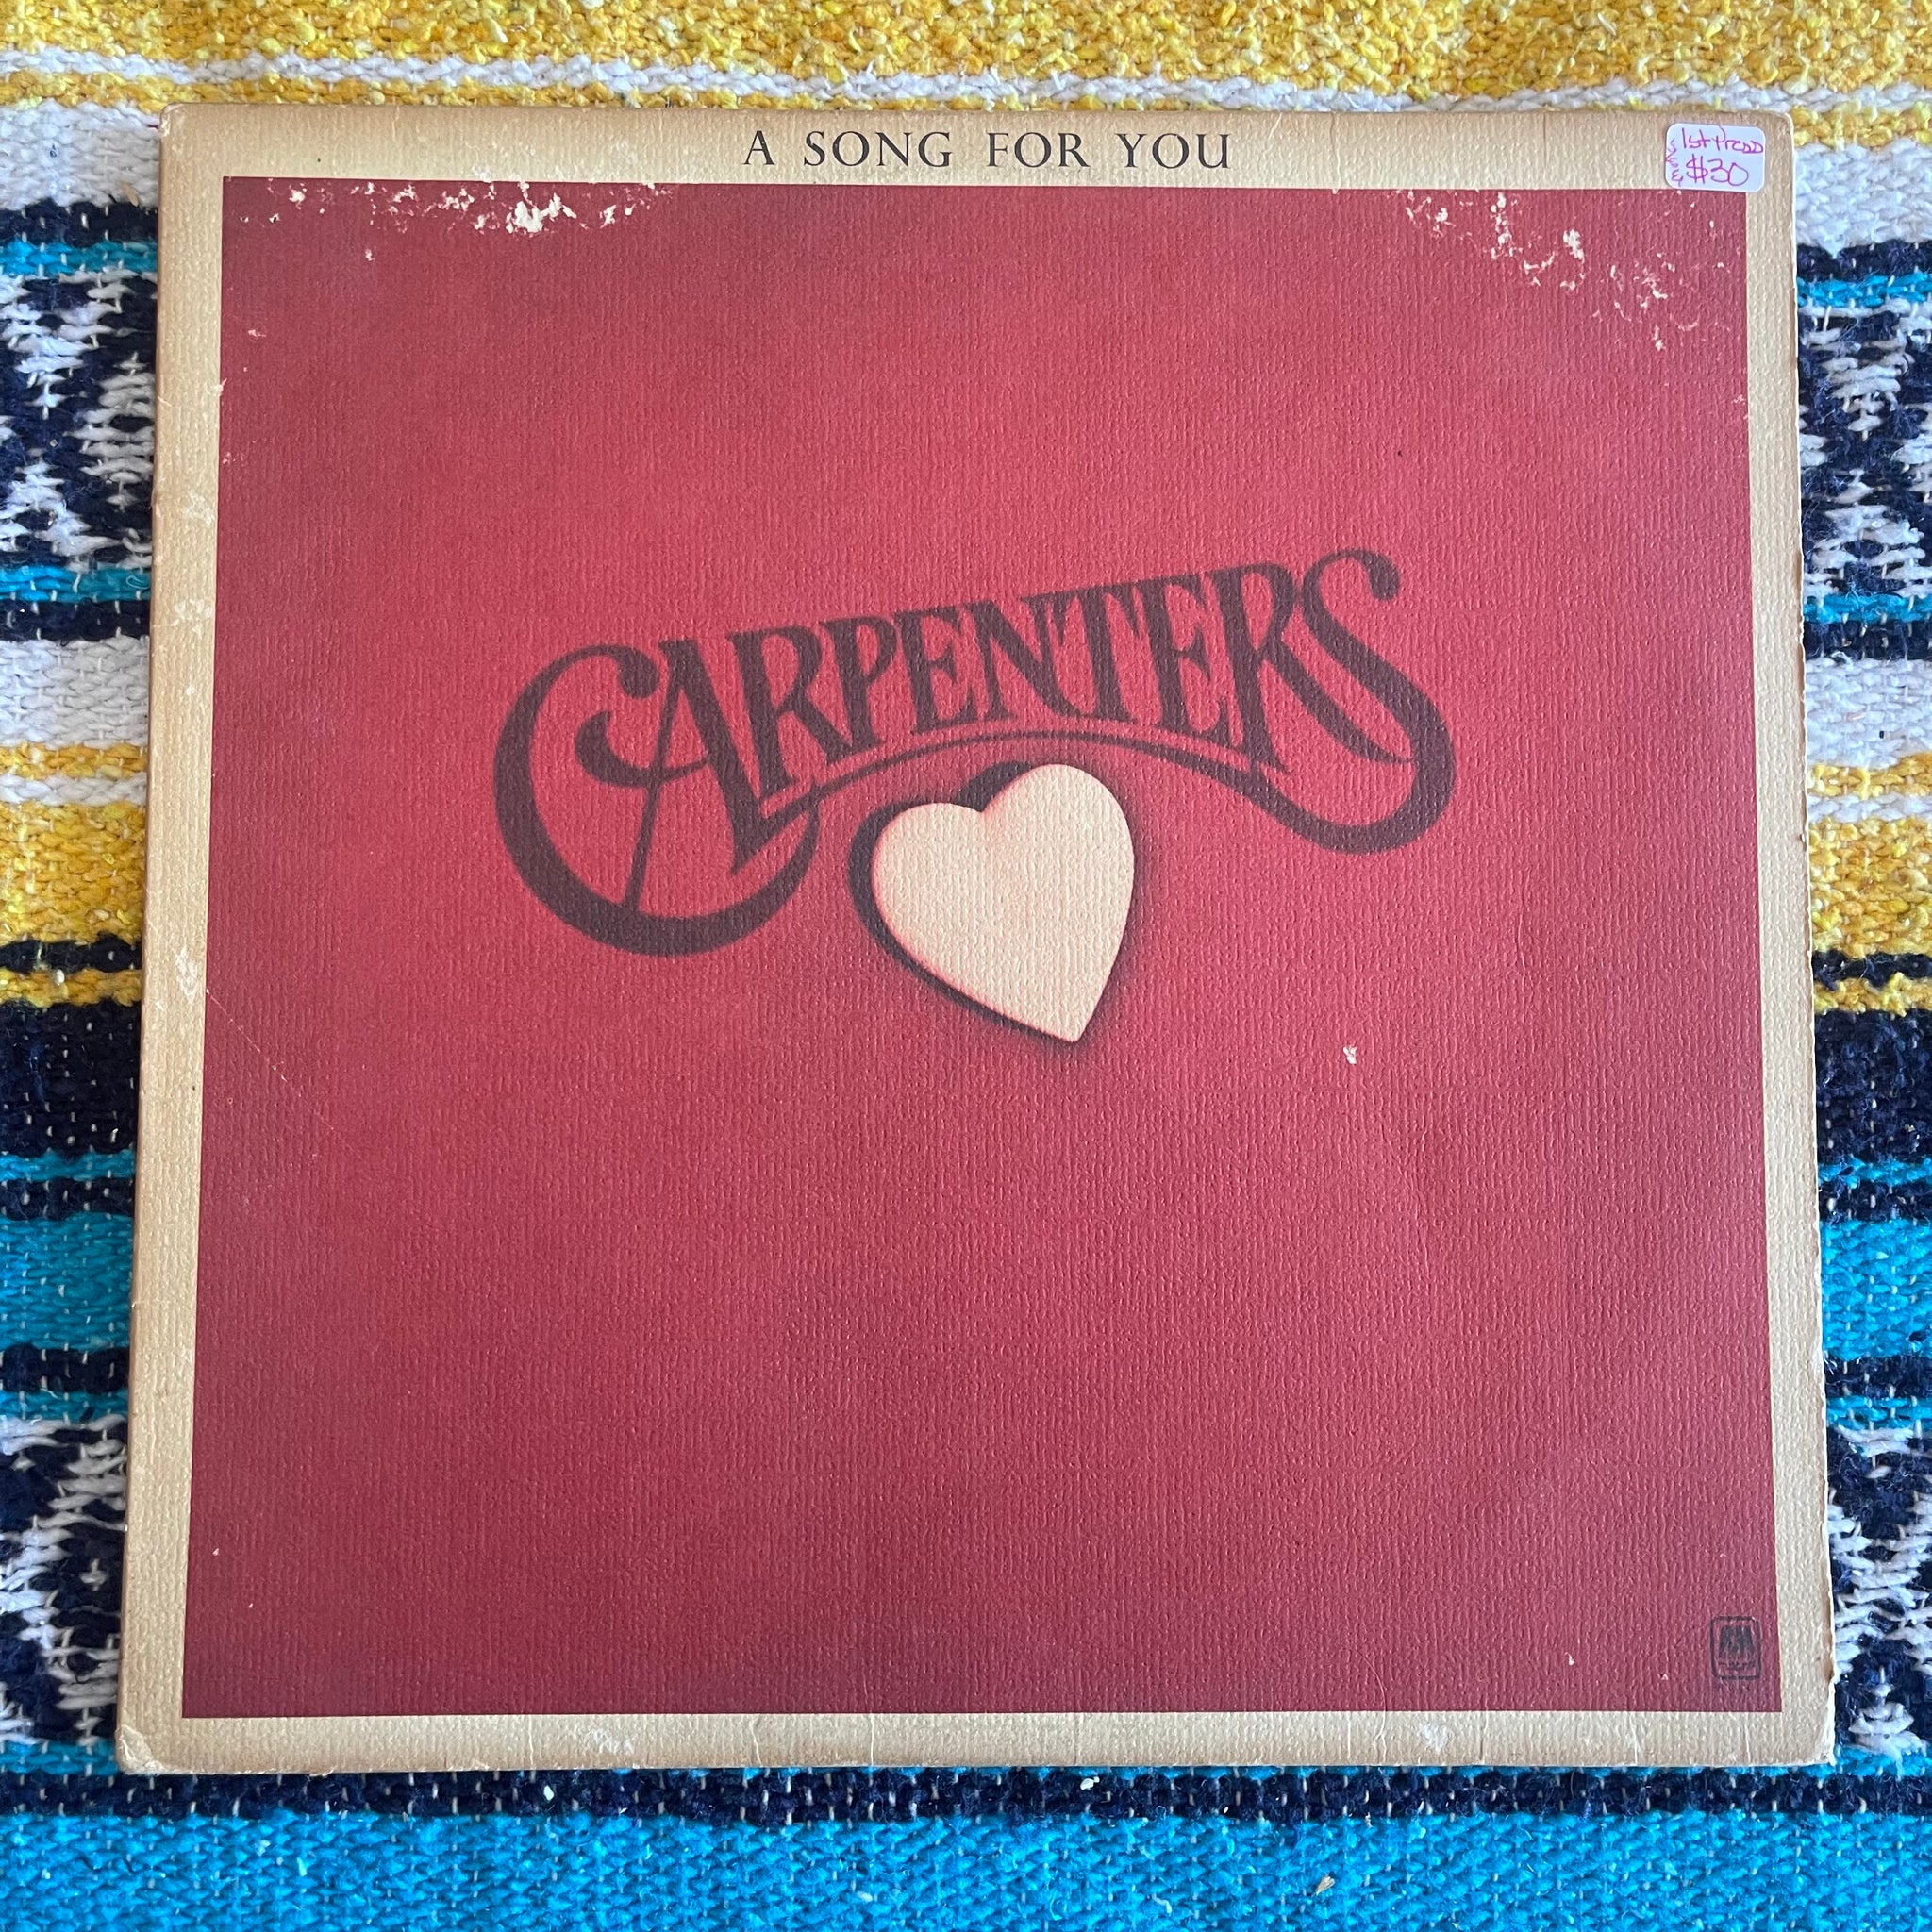 Carpenters-A Song For You